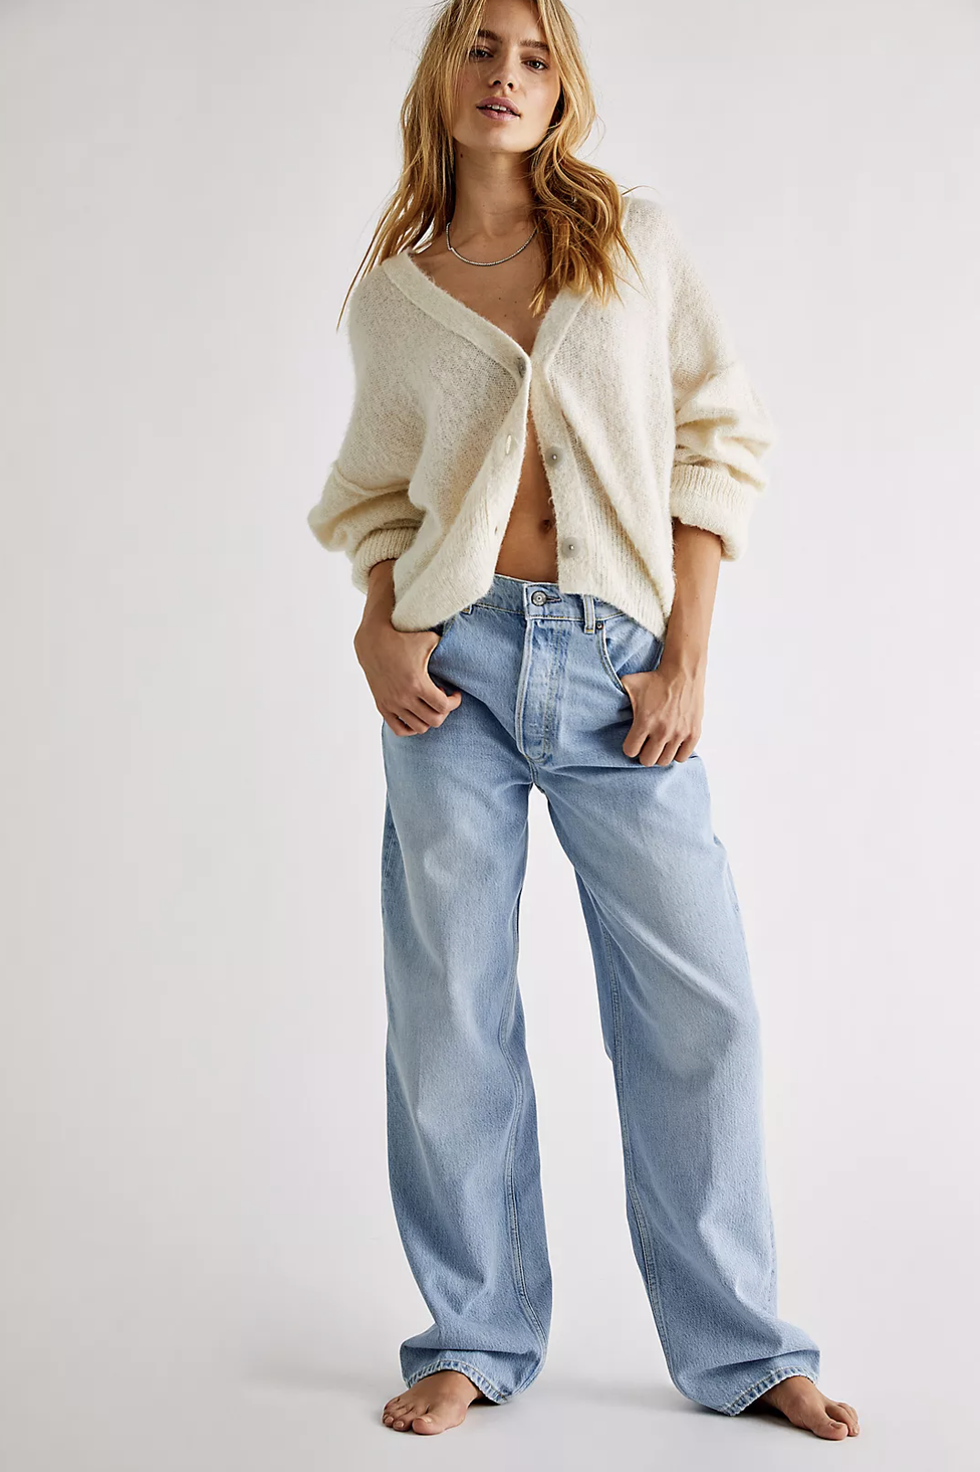 Women's Tapered Jeans & Luxe Slim Fit Jeans - Farfetch